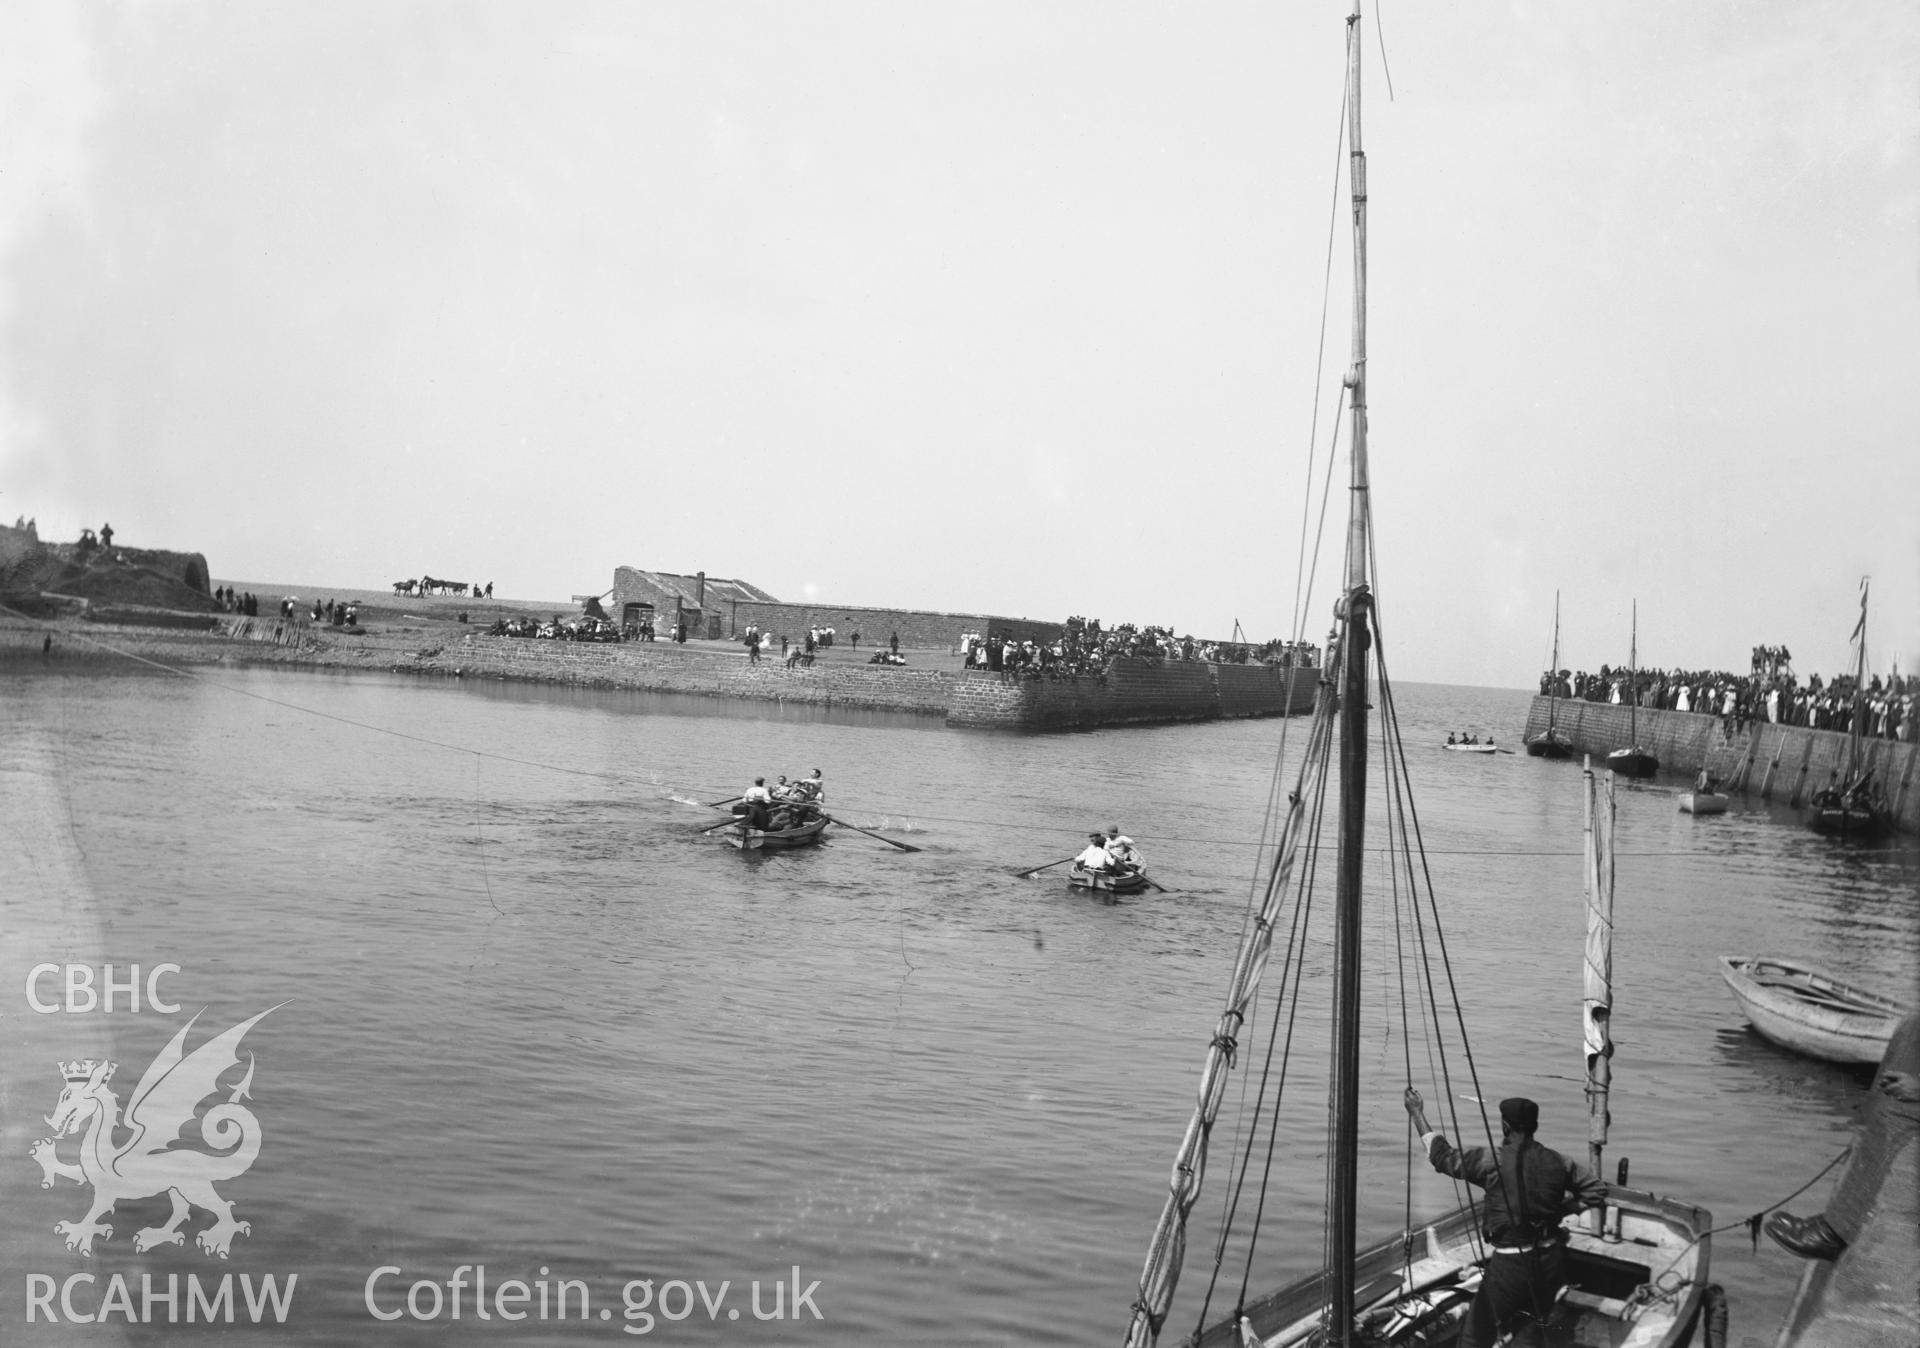 Black and white image dating from c.1910 showing the harbour in Aberaeron with a boat race in progress.